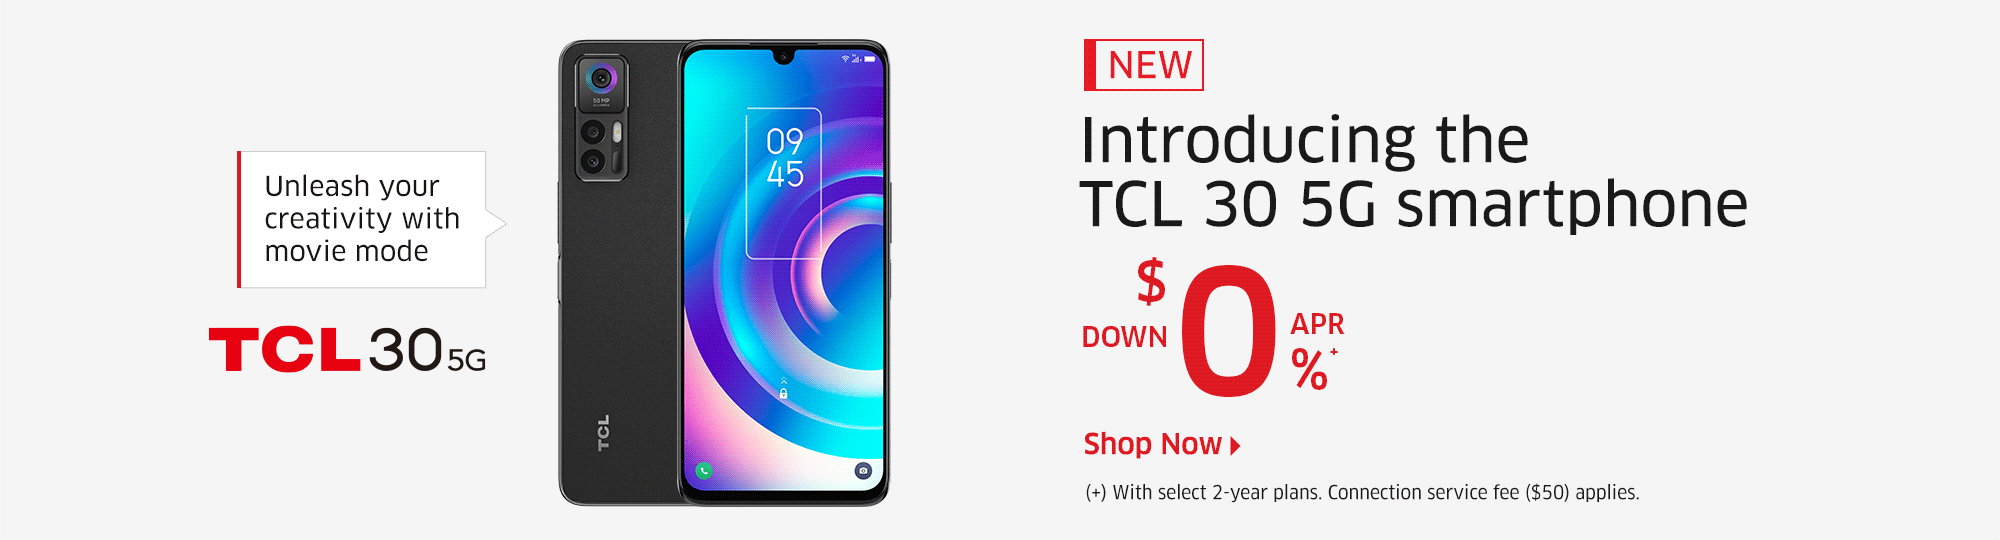 Unleash your creativity with movie mode  NEW  Introducing the TCL 30 5G smartphone  $0 DOWN, 0% APR(+)  (+) With select 2-year plans. Connection service fee ($50) applies.